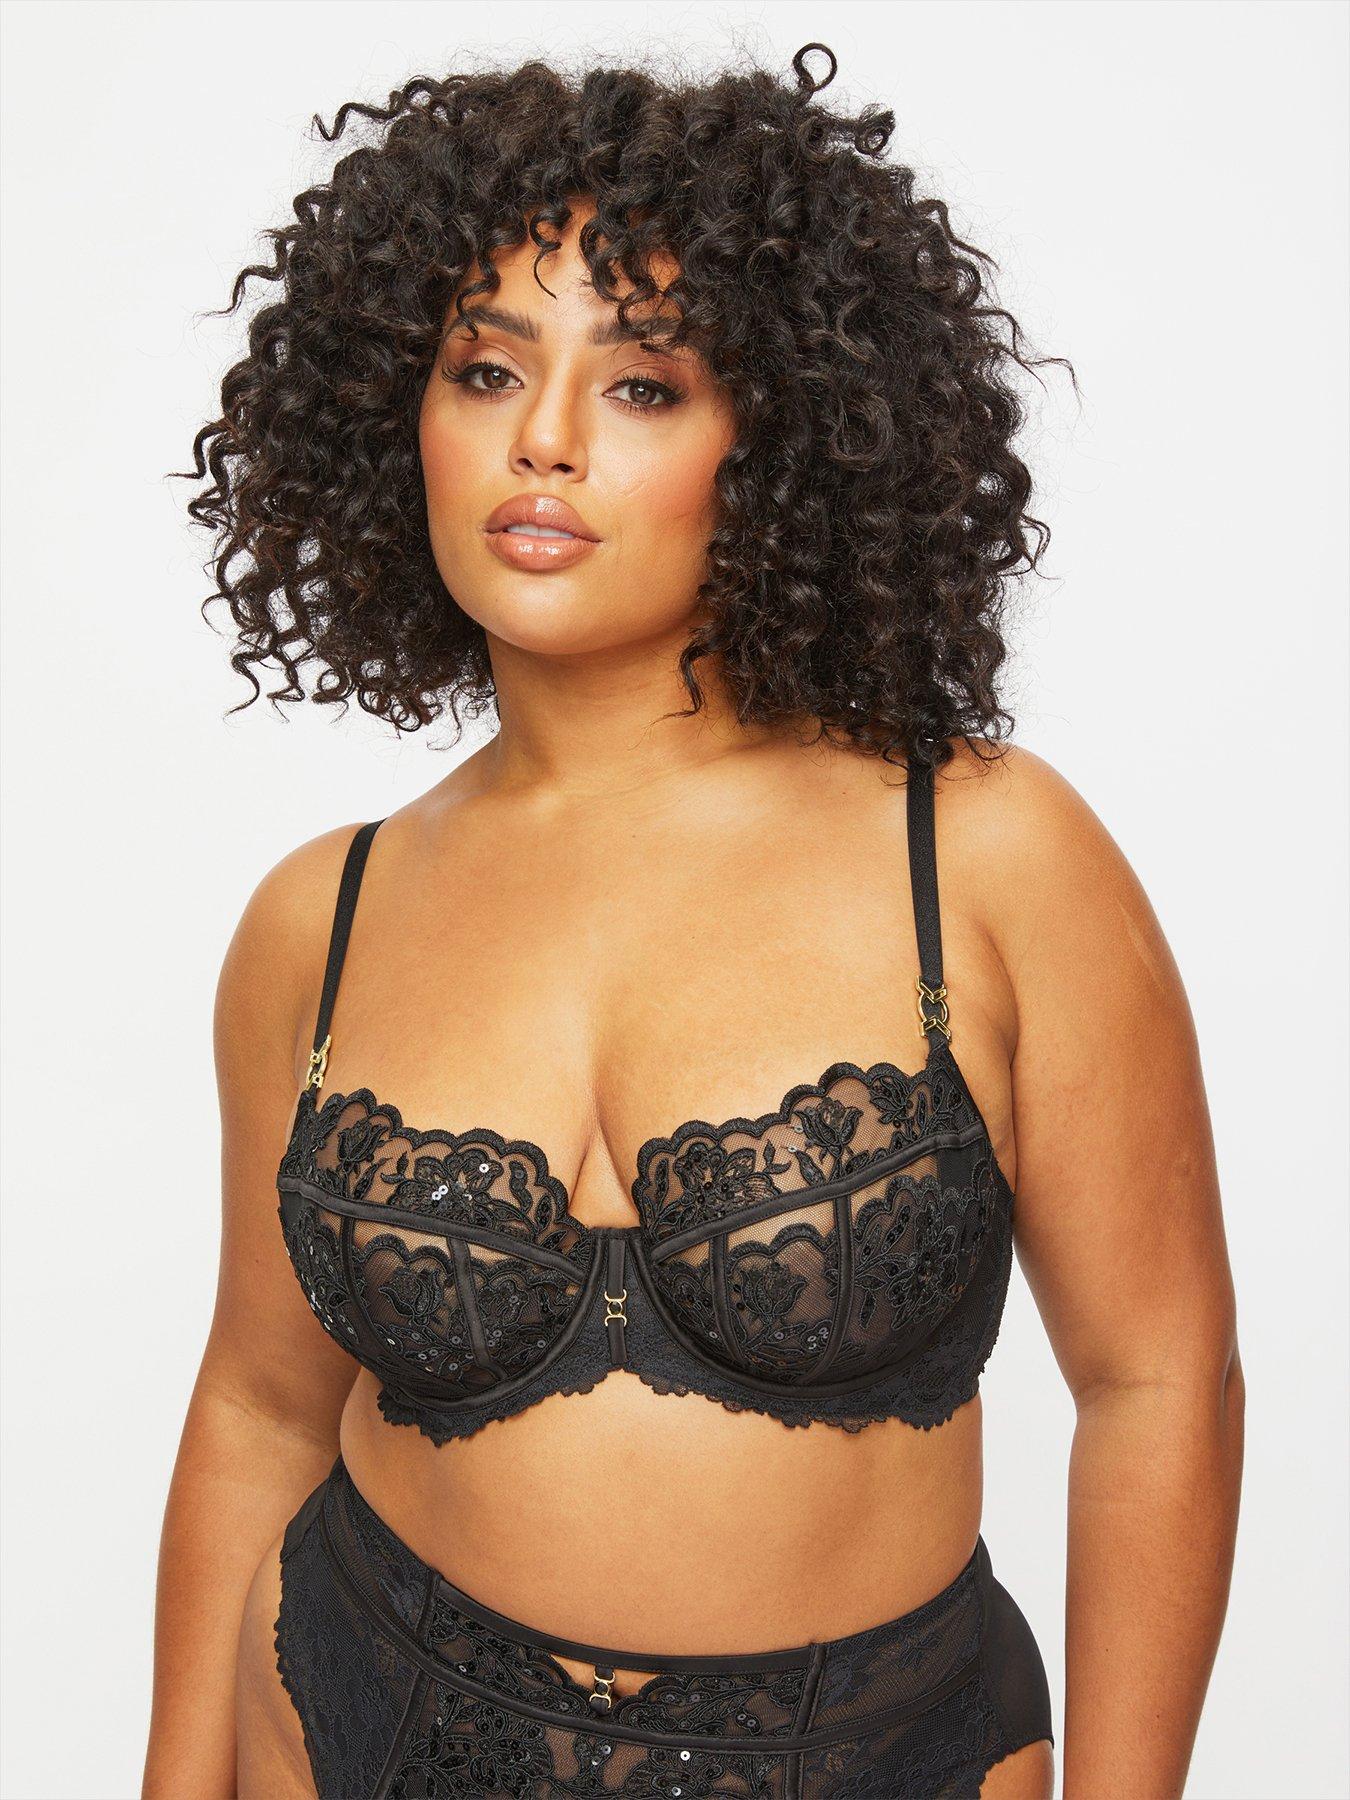 Ann Summers Carmen non padded balconette bra with lace trim detail